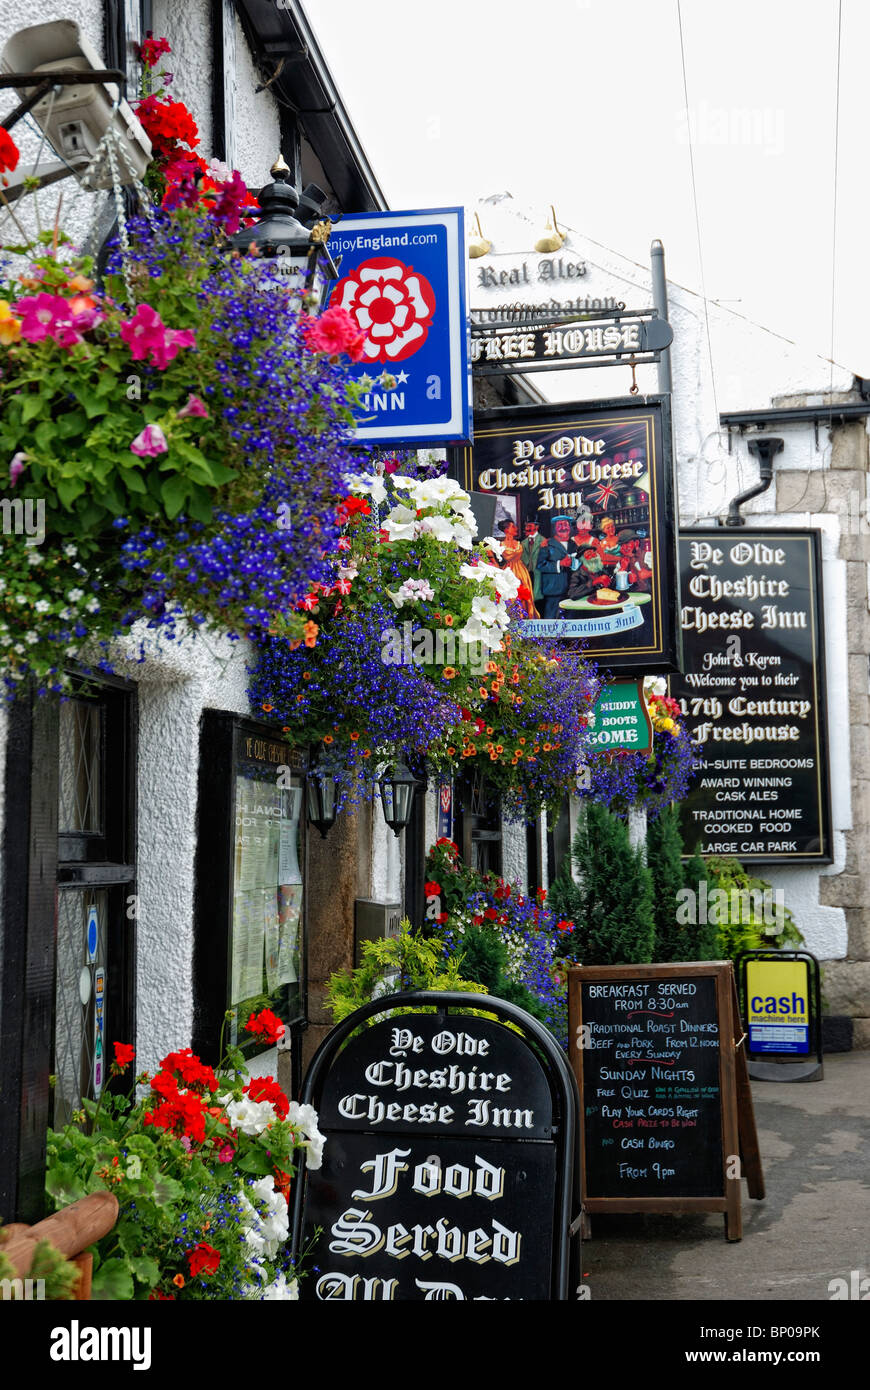 Ye old Cheshire Cheese inn Castleton angleterre Derbyshire UK Banque D'Images